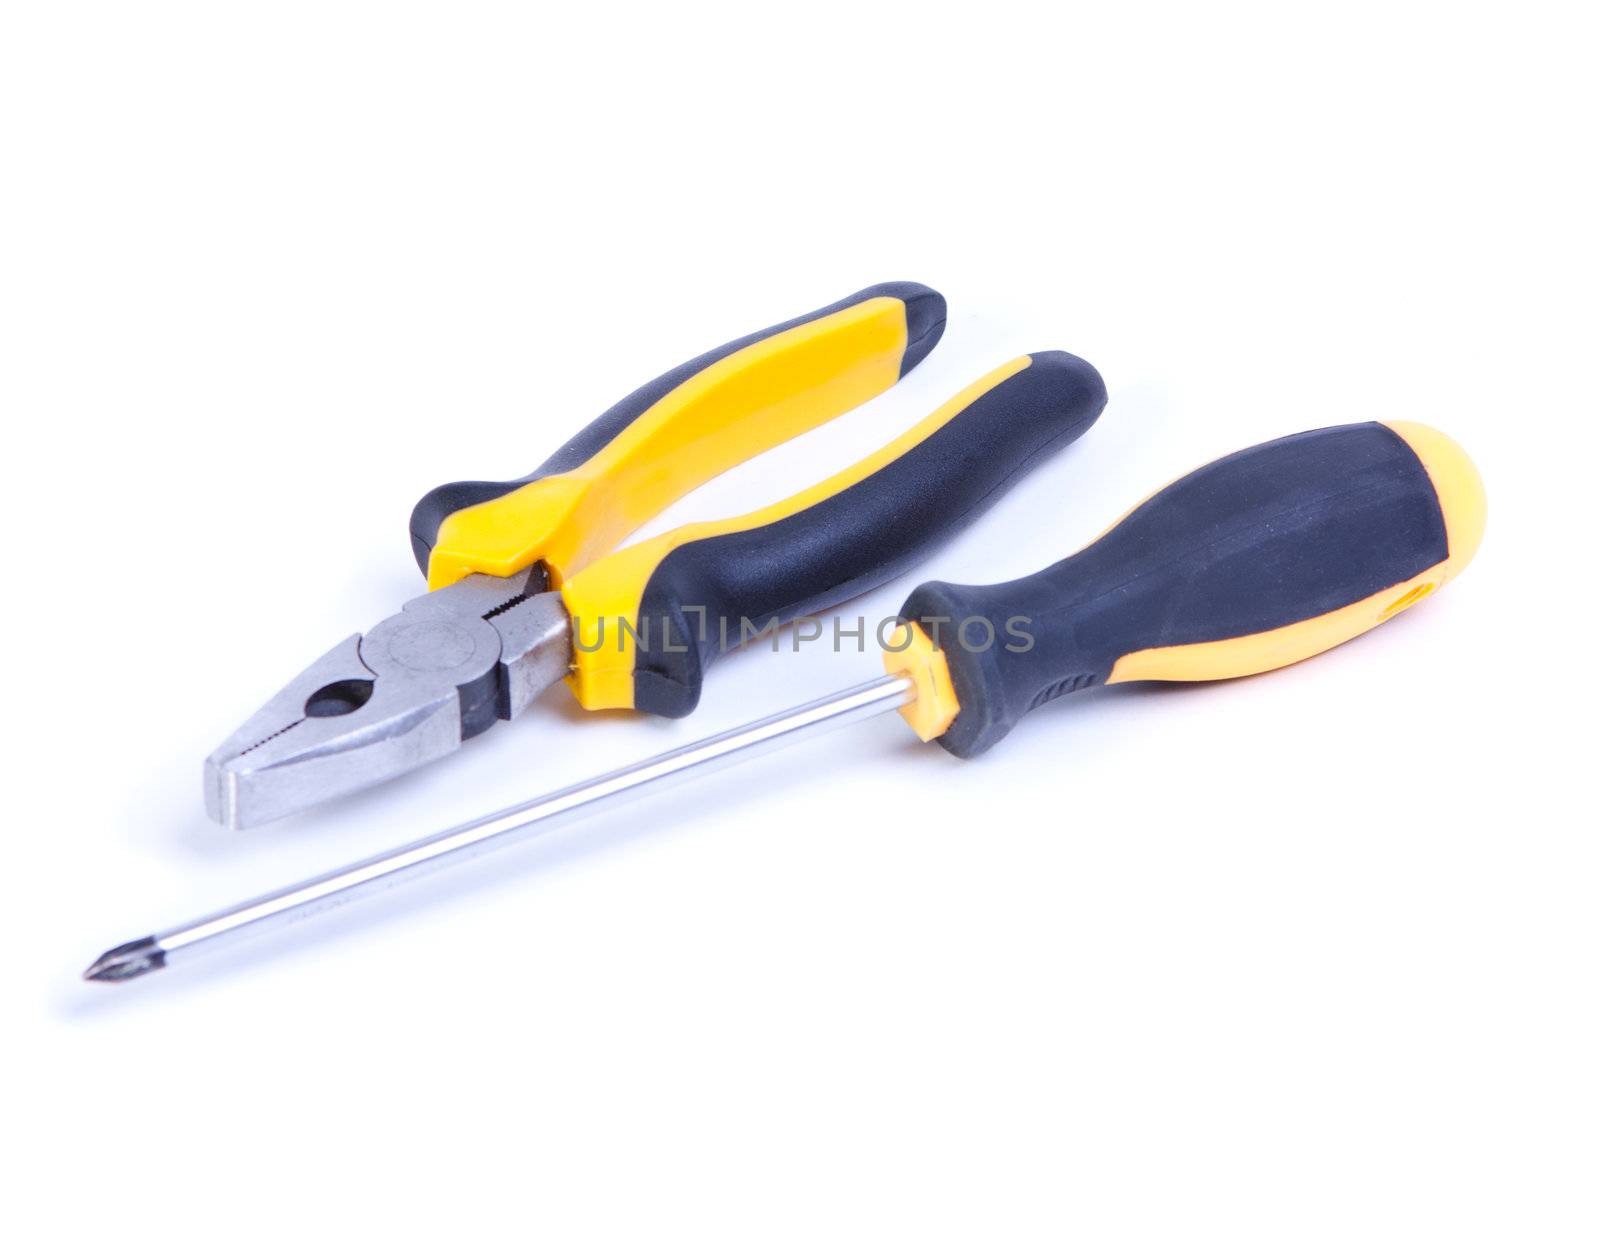 screwdriver and pliers isolated on white background